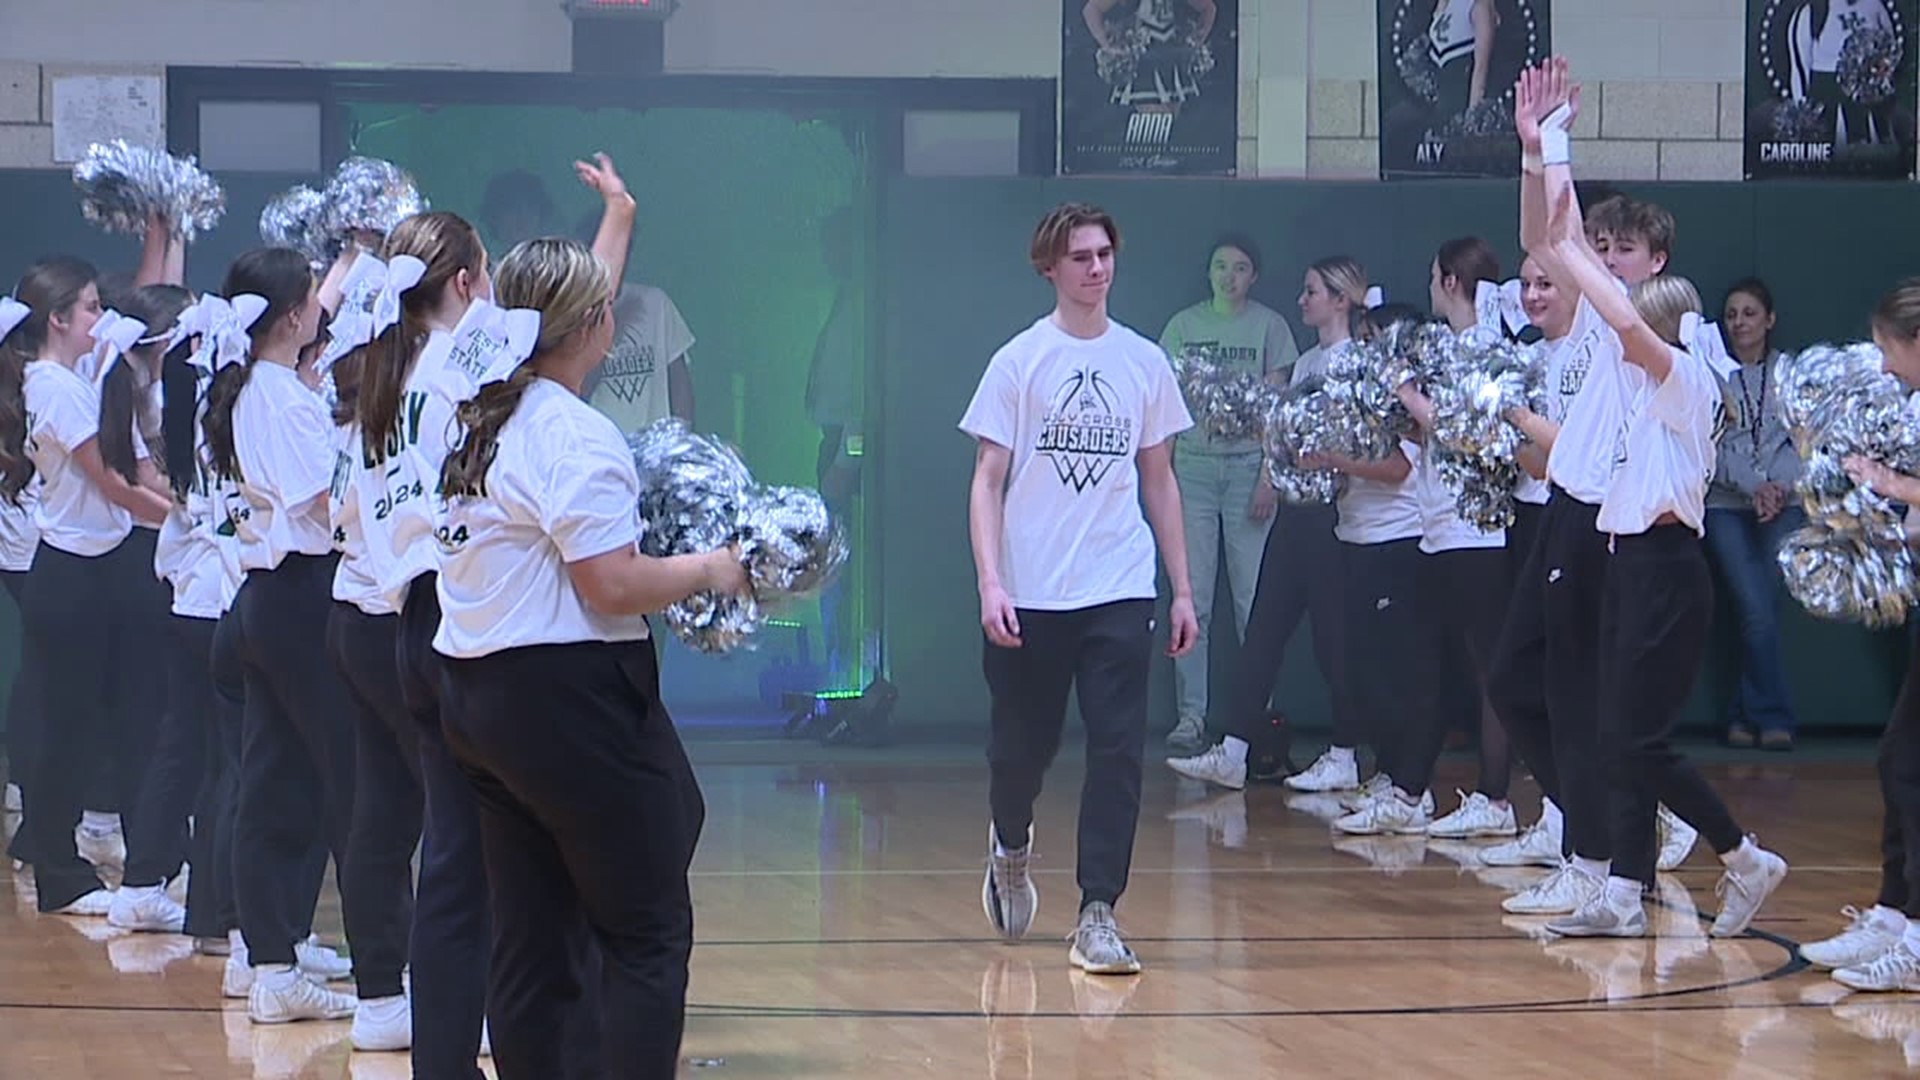 Hoping for history at Holy Cross, the school hosted a pep rally for the boys basketball team, seeking the school's first PIAA boys basketball state championship.